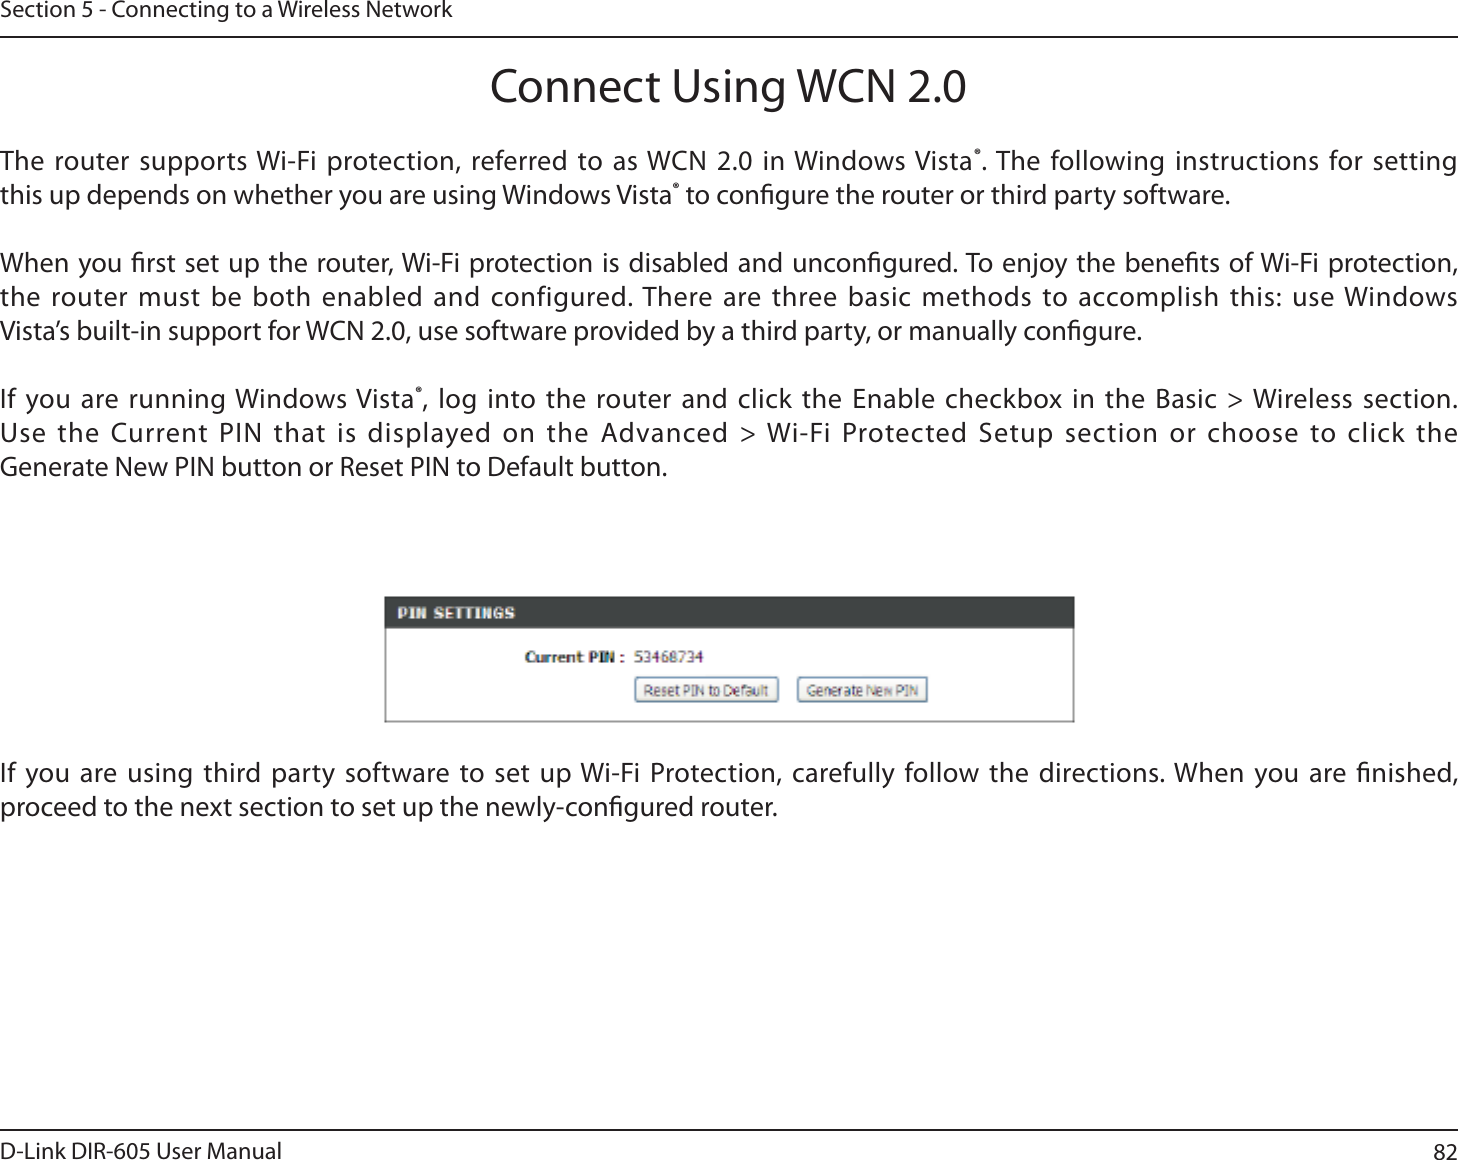 82D-Link DIR-605 User ManualSection 5 - Connecting to a Wireless NetworkConnect Using WCN 2.0The router supports Wi-Fi protection, referred to as WCN 2.0 in Windows Vista®. The following instructions for setting this up depends on whether you are using Windows Vista® to congure the router or third party software. When you rst set up the router, Wi-Fi protection is disabled and uncongured. To enjoy the benets of Wi-Fi protection, the router must be both enabled and configured. There are three basic methods to accomplish this: use Windows Vista’s built-in support for WCN 2.0, use software provided by a third party, or manually congure. If you are running Windows Vista®, log into the router and click the Enable checkbox in the Basic &gt; Wireless section. Use the Current PIN that is displayed on the Advanced &gt; Wi-Fi Protected Setup section or choose to click the Generate New PIN button or Reset PIN to Default button. If you are using third party software to set up Wi-Fi Protection, carefully follow the directions. When you are nished, proceed to the next section to set up the newly-congured router.